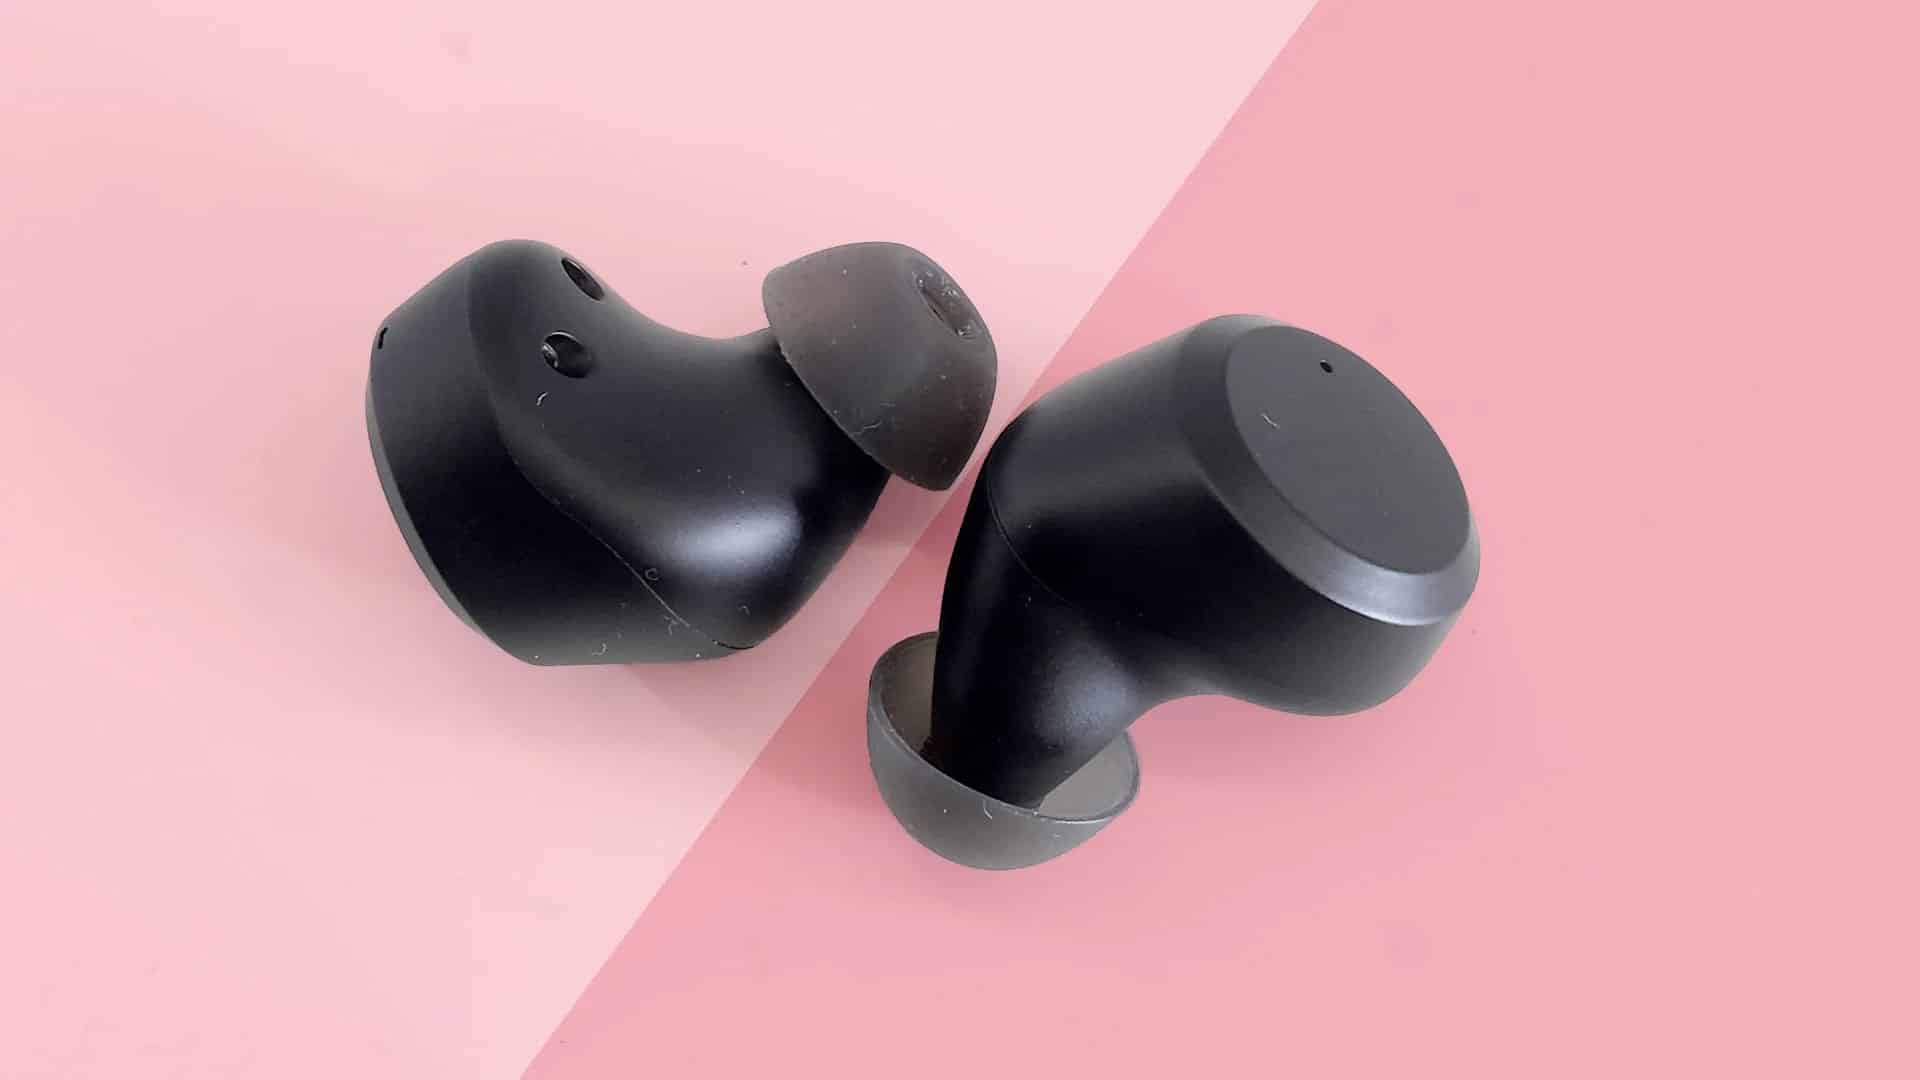 The Nocs Design NS1100 AIR Audiophile Wireless Earbuds